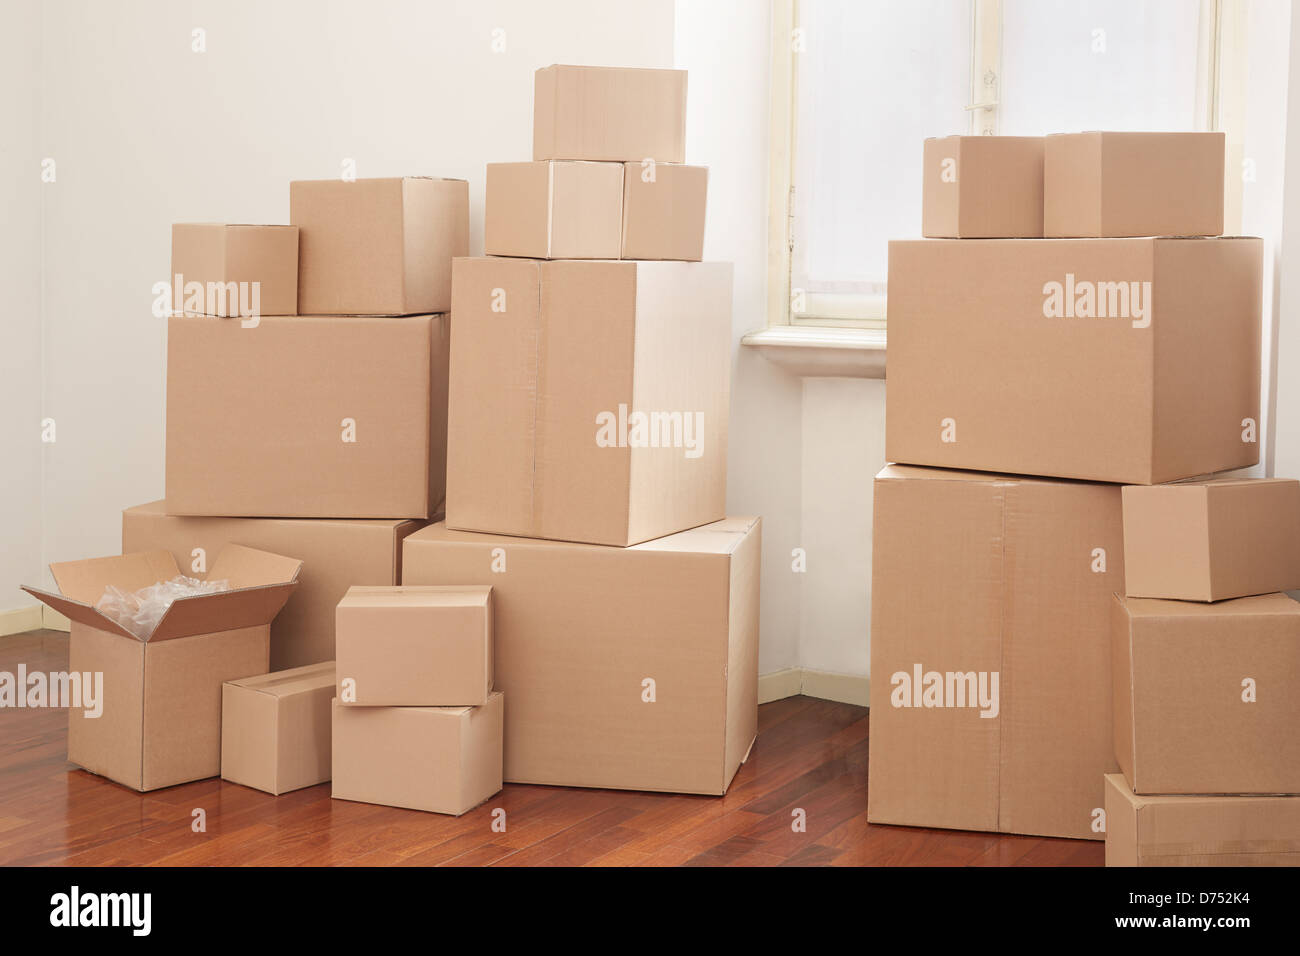 Cardboard boxes in apartment, moving day Stock Photo